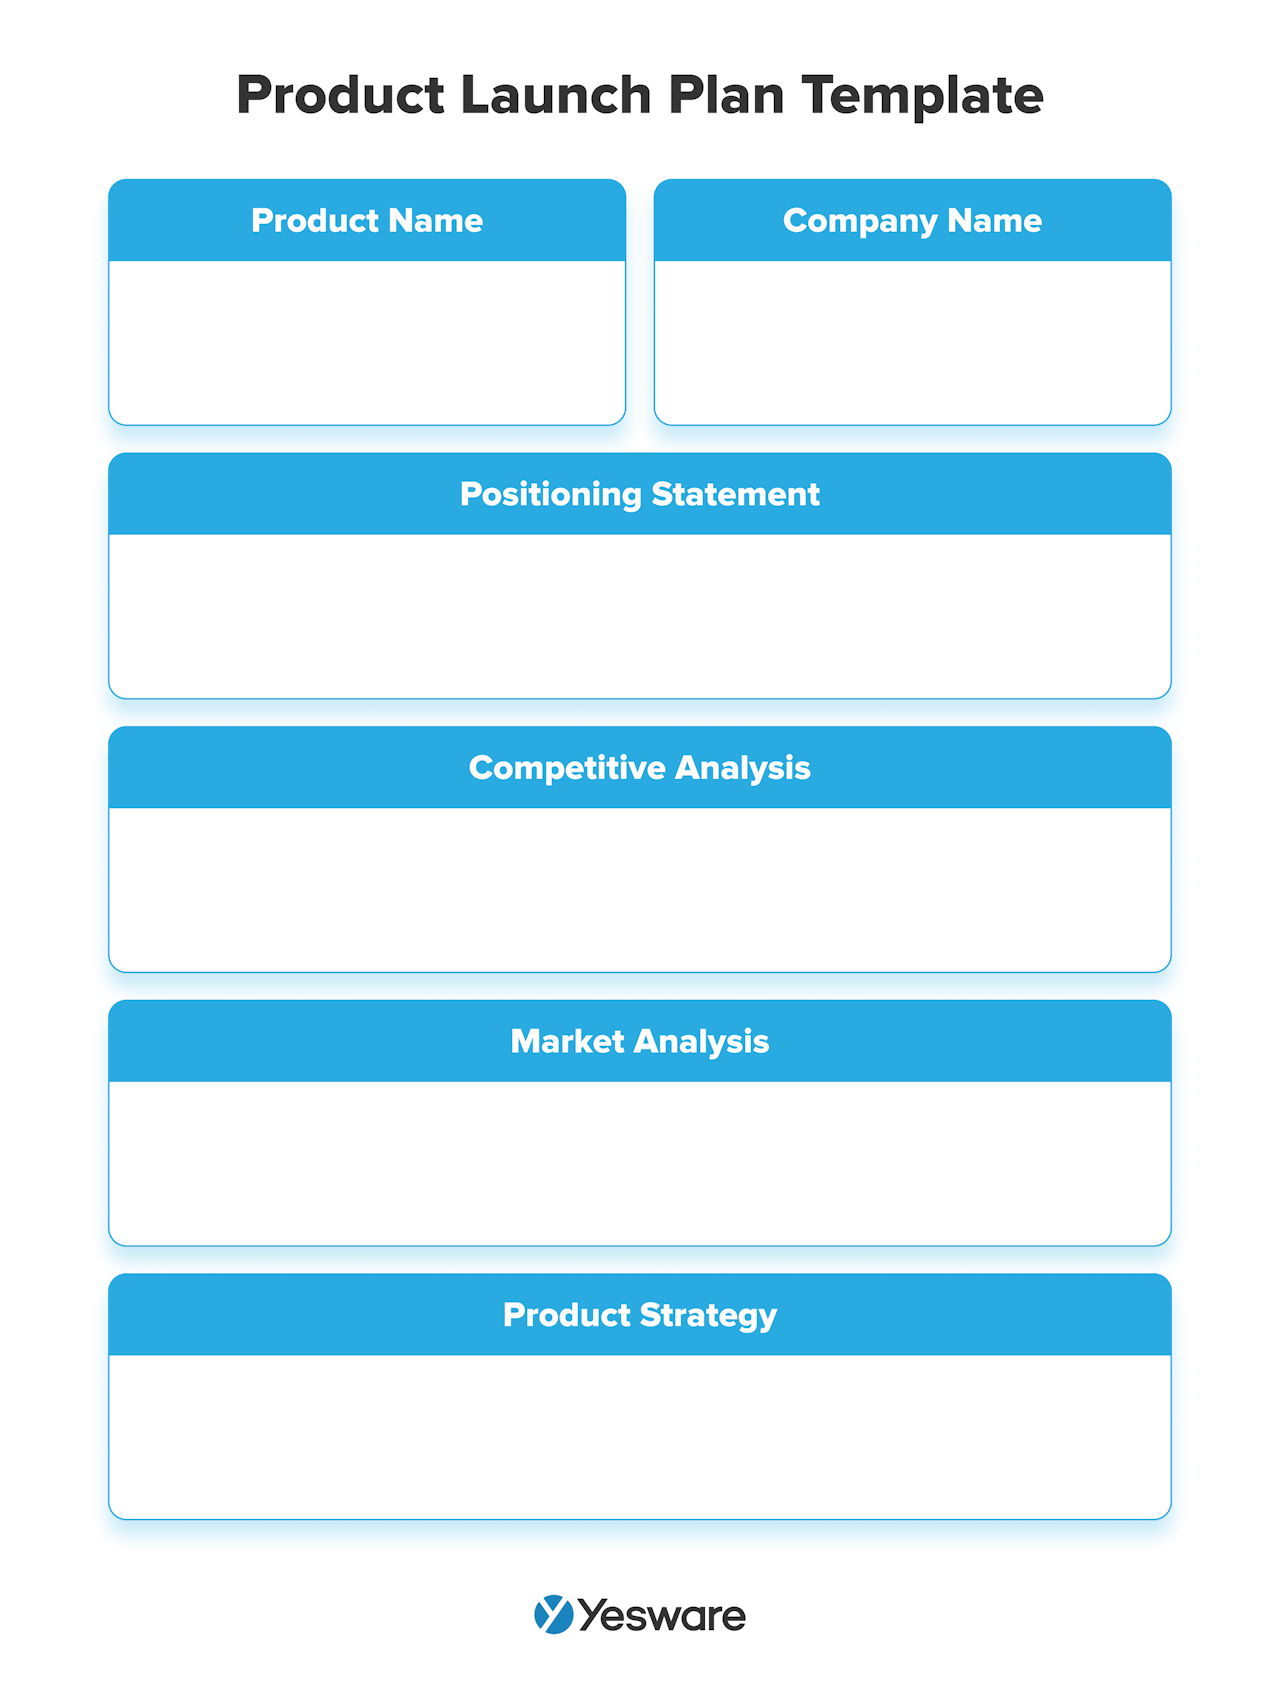 Product Launch Sales Plan Template